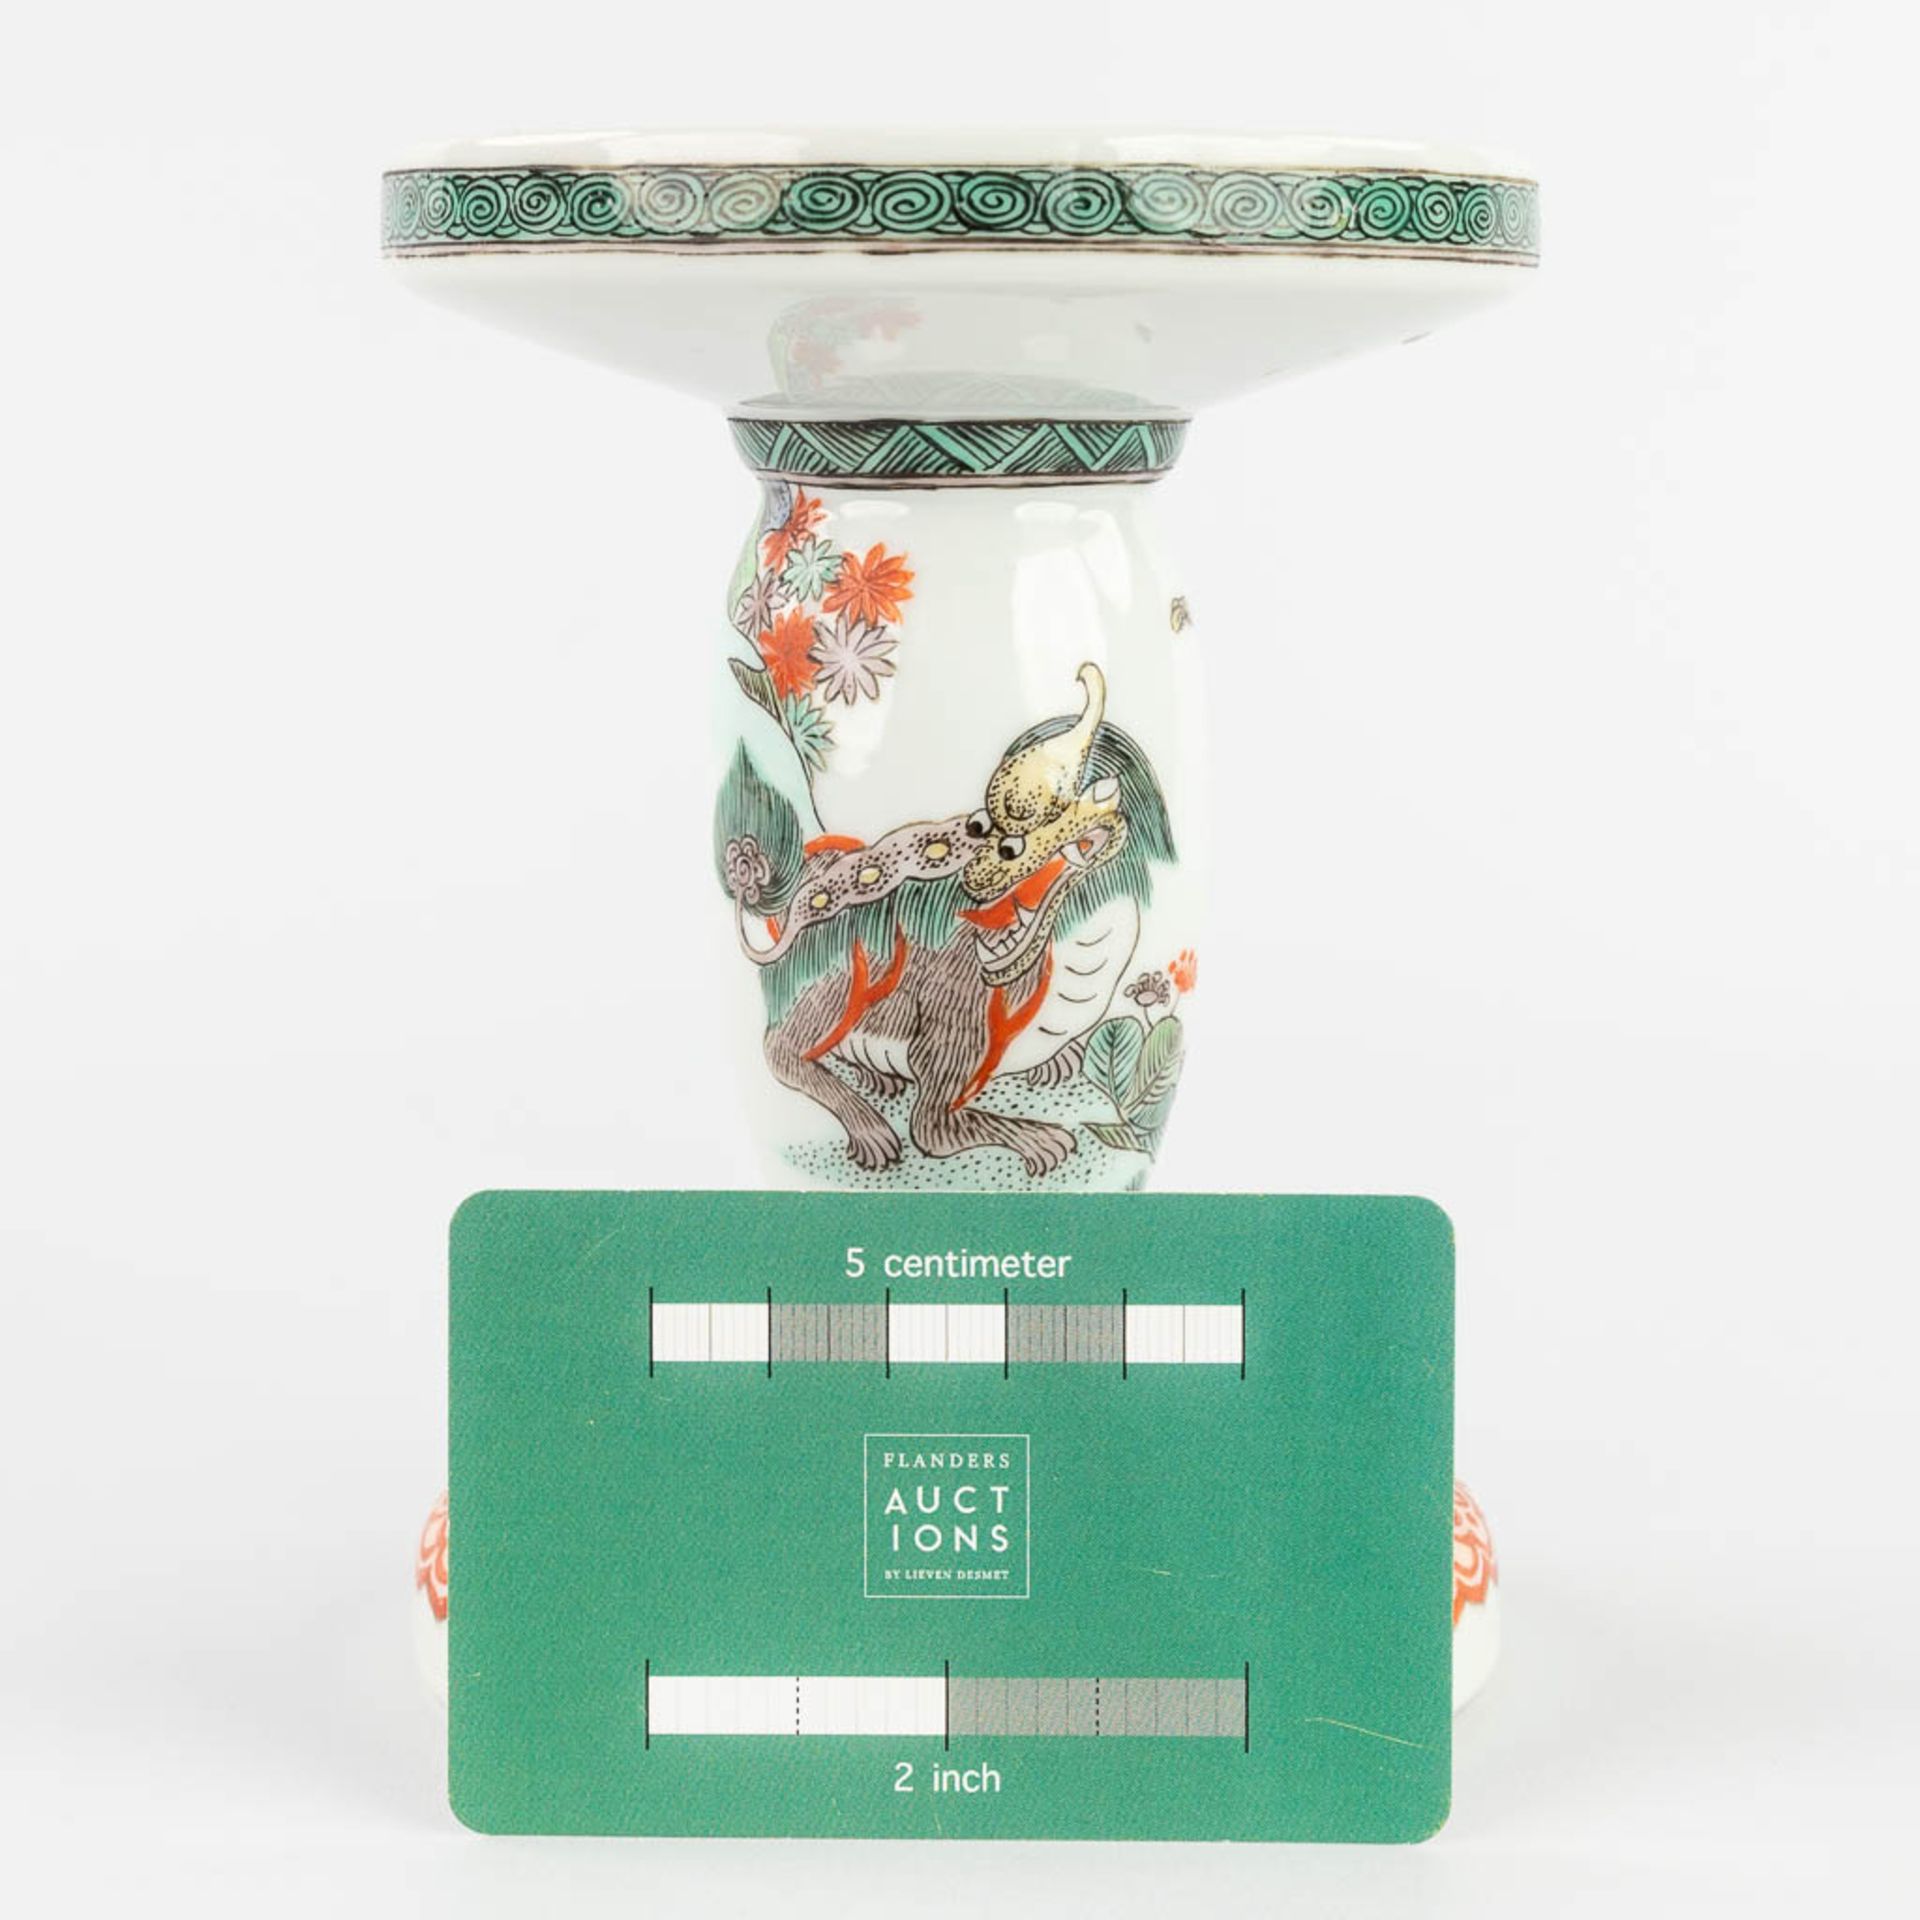 A Chinese porcelain candle holder, decorated with a foo dog. 20th C. (H:14,5 x D:11 cm) - Image 2 of 13